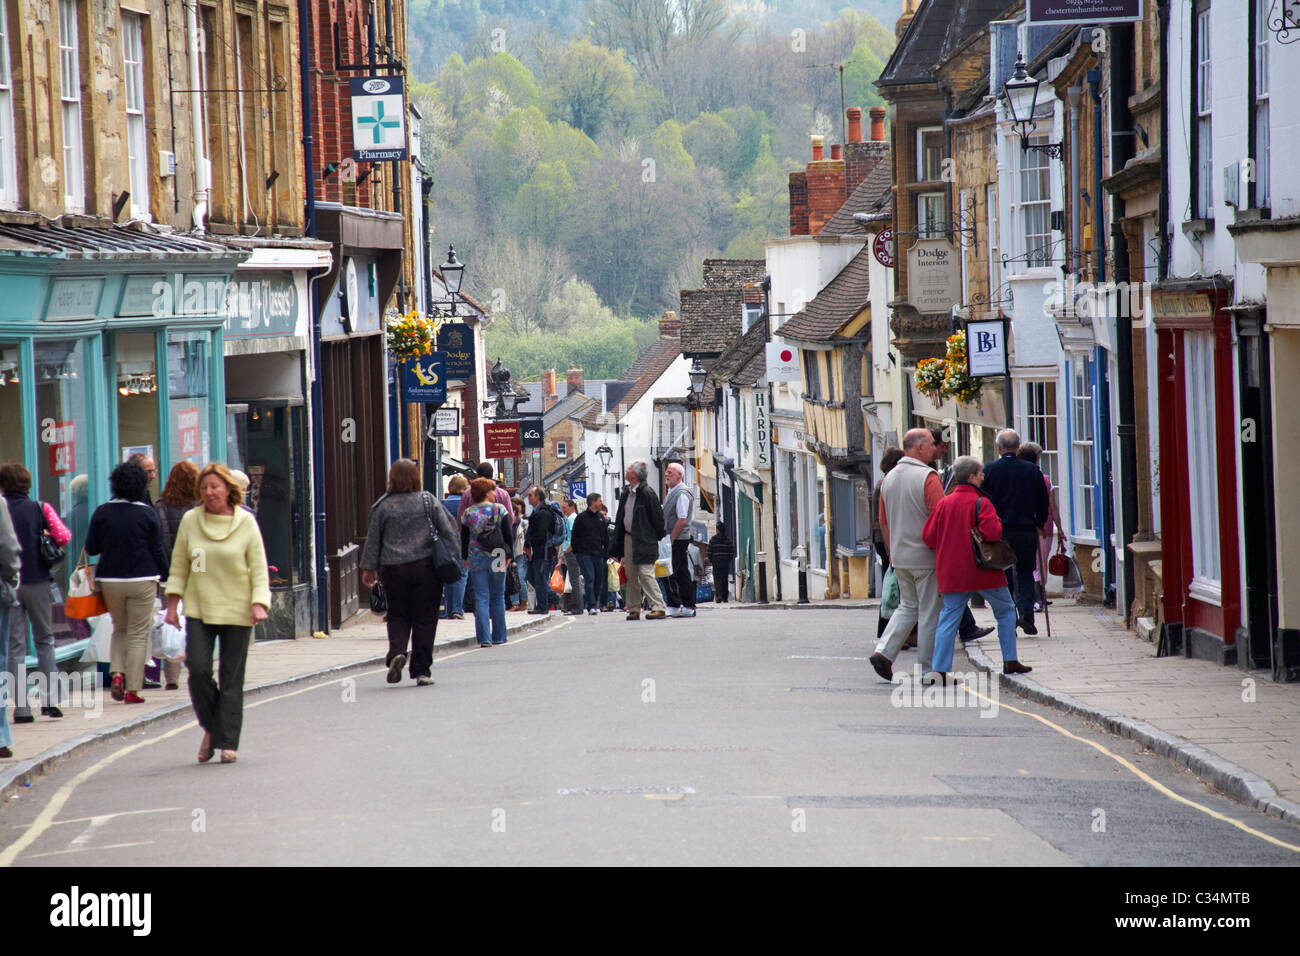 Visitors and shoppers at Cheap Street, Cheap St, Sherborne, Dorset UK  in April Stock Photo